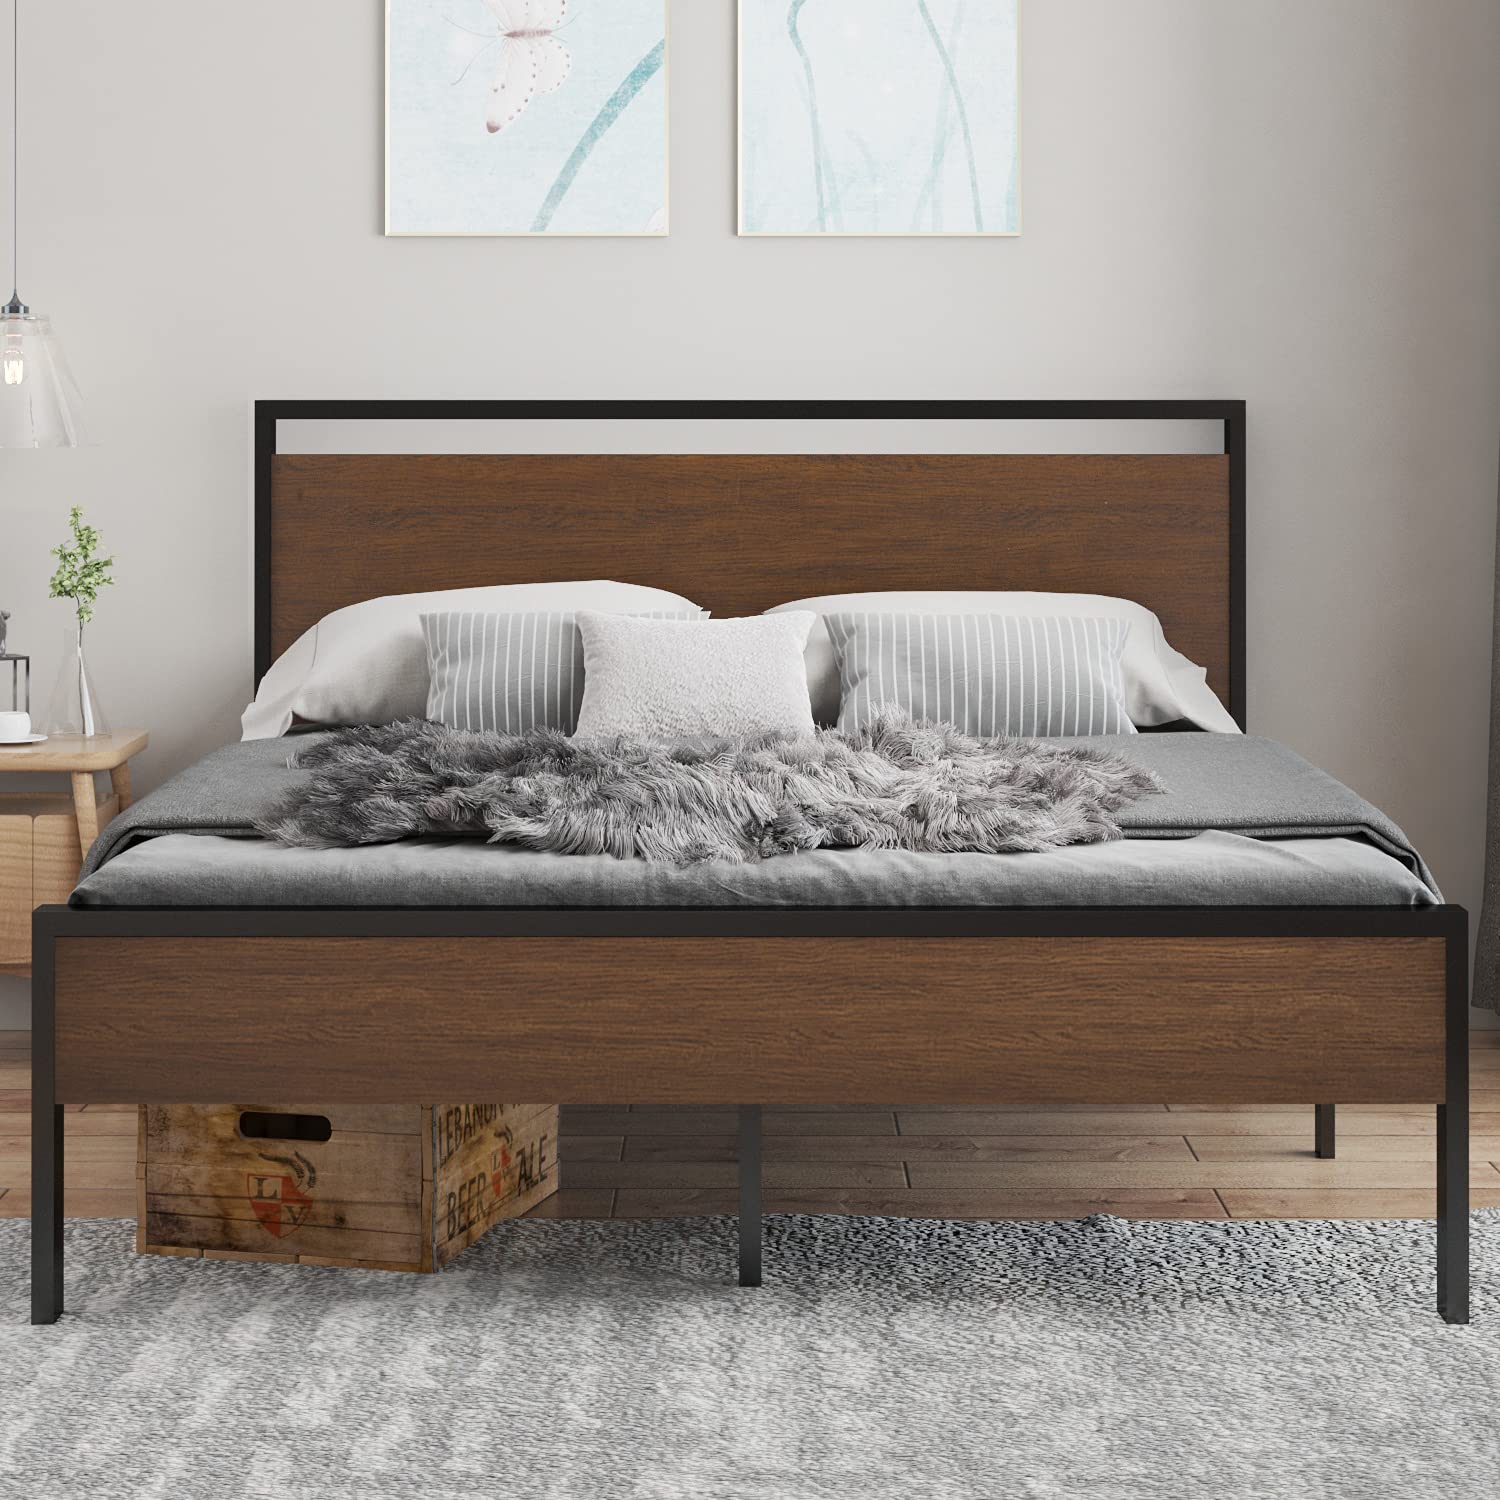 Metal Bed Frame Without Headboard Or Footboard For King : Bed Frame Or